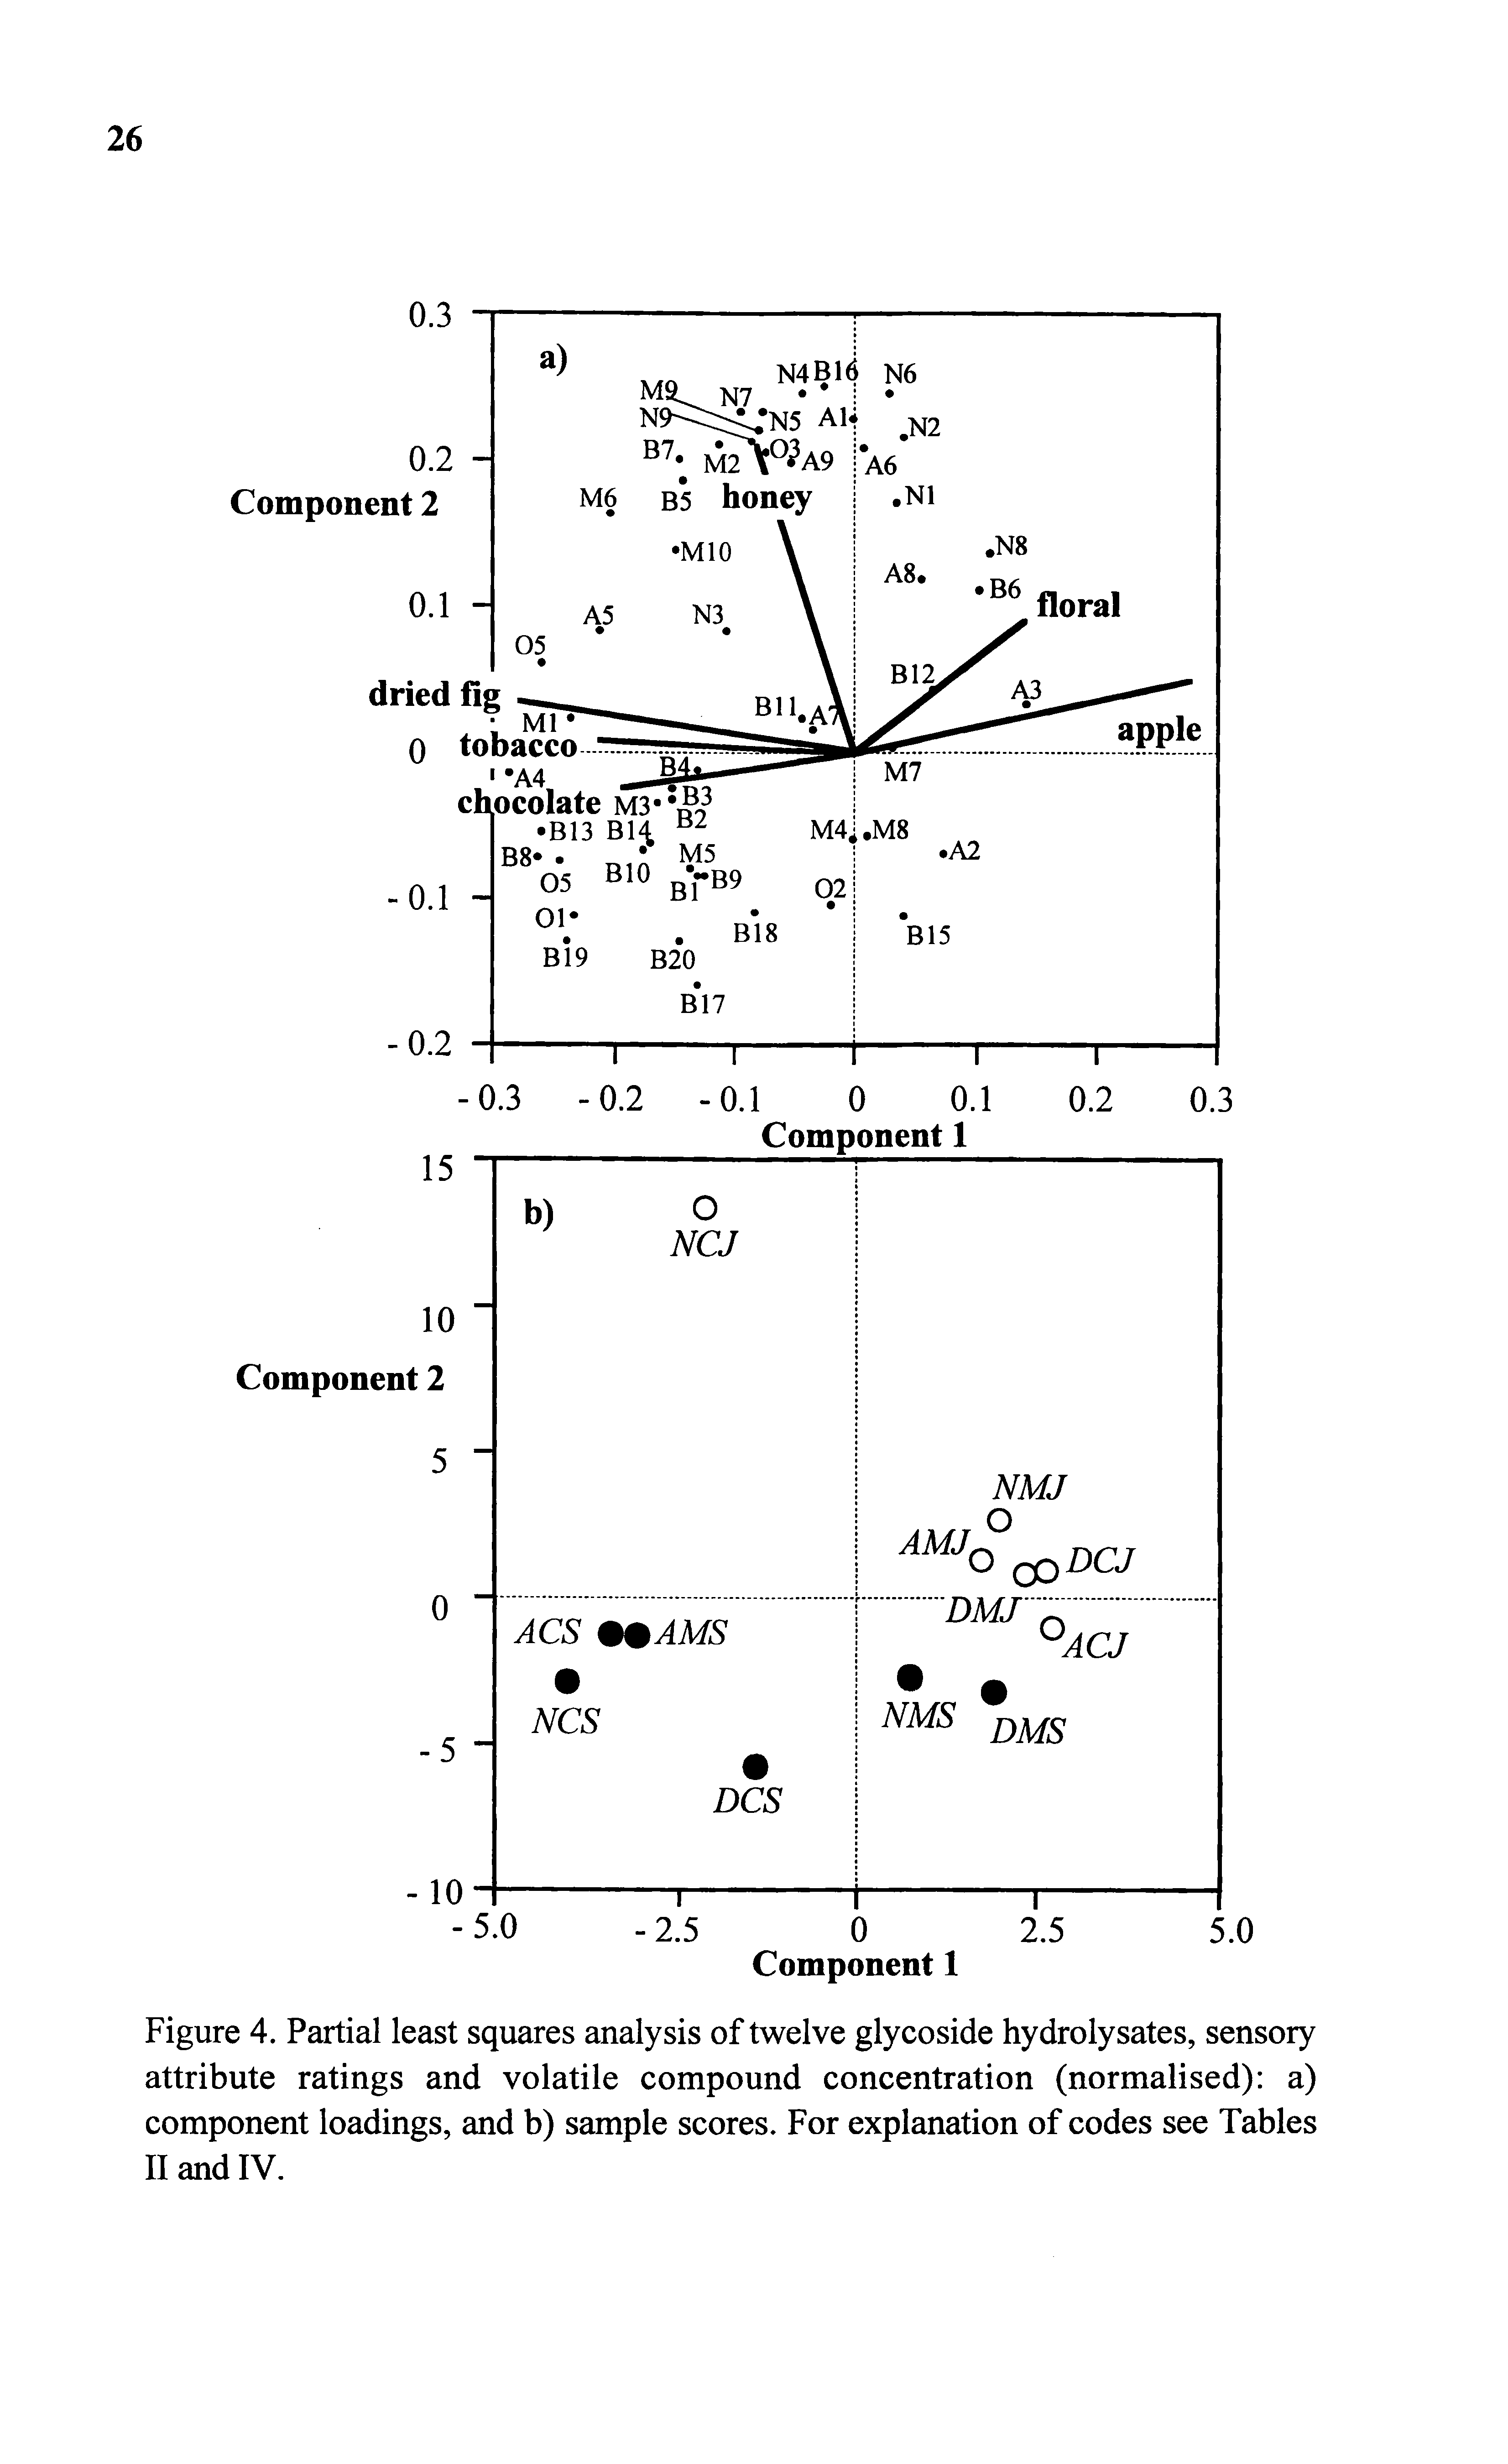 Figure 4. Partial least squares analysis of twelve glycoside hydrolysates, sensory attribute ratings and volatile compound concentration (normalised) a) component loadings, and b) sample scores. For explanation of codes see Tables II and IV.